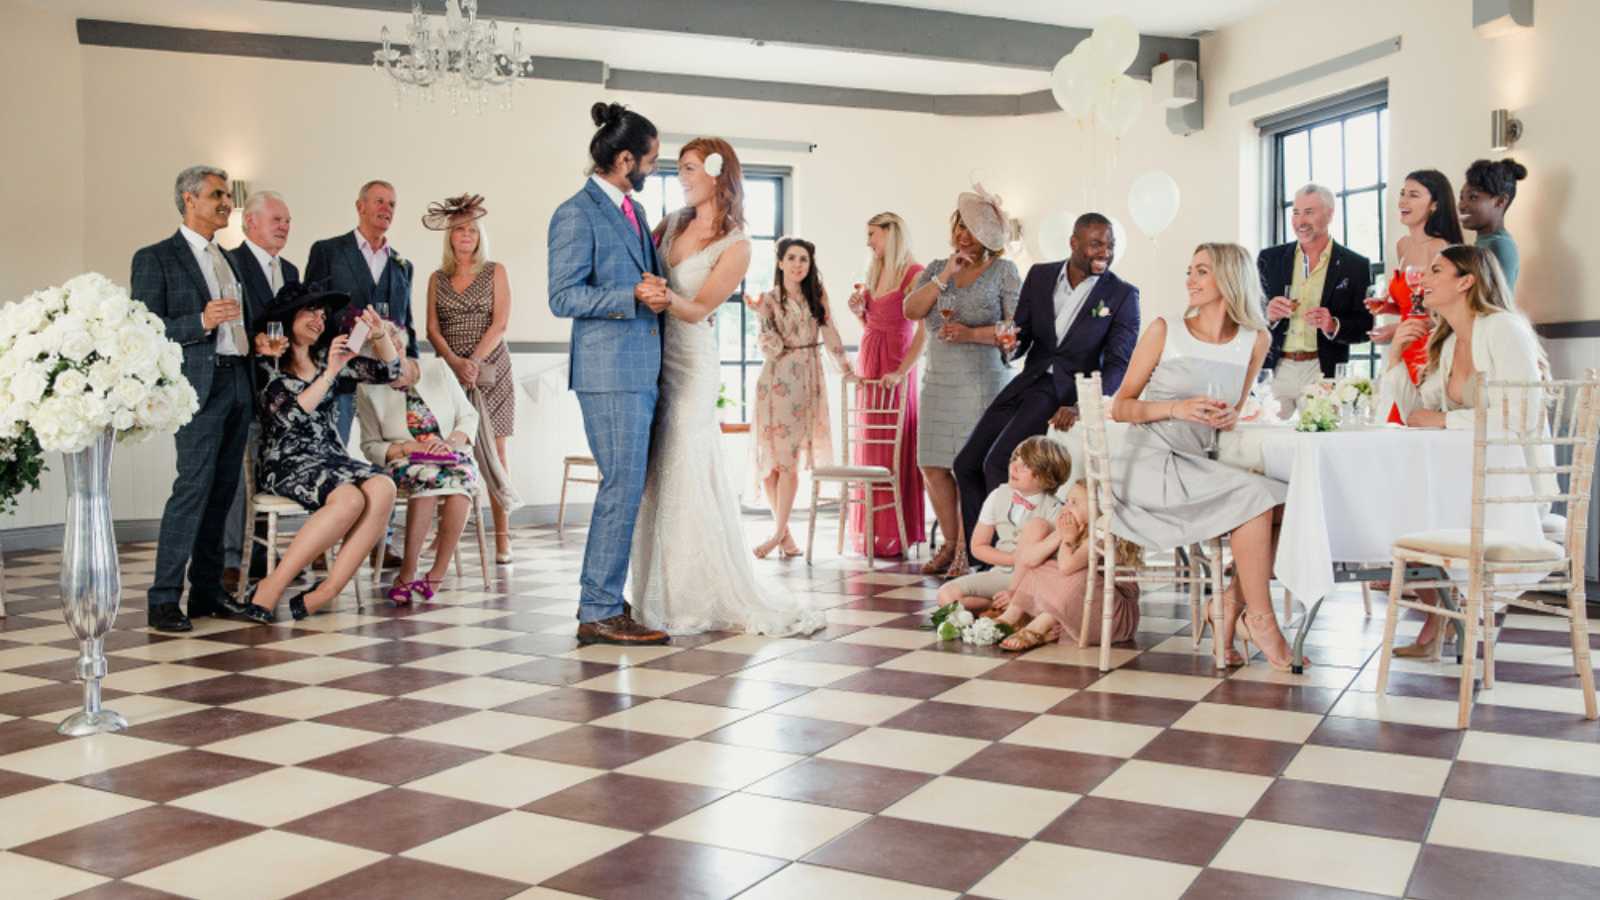 Beautiful couple are sharing their first dance on their wedding day. All of their guests are sitting around the dancefloor watching them.